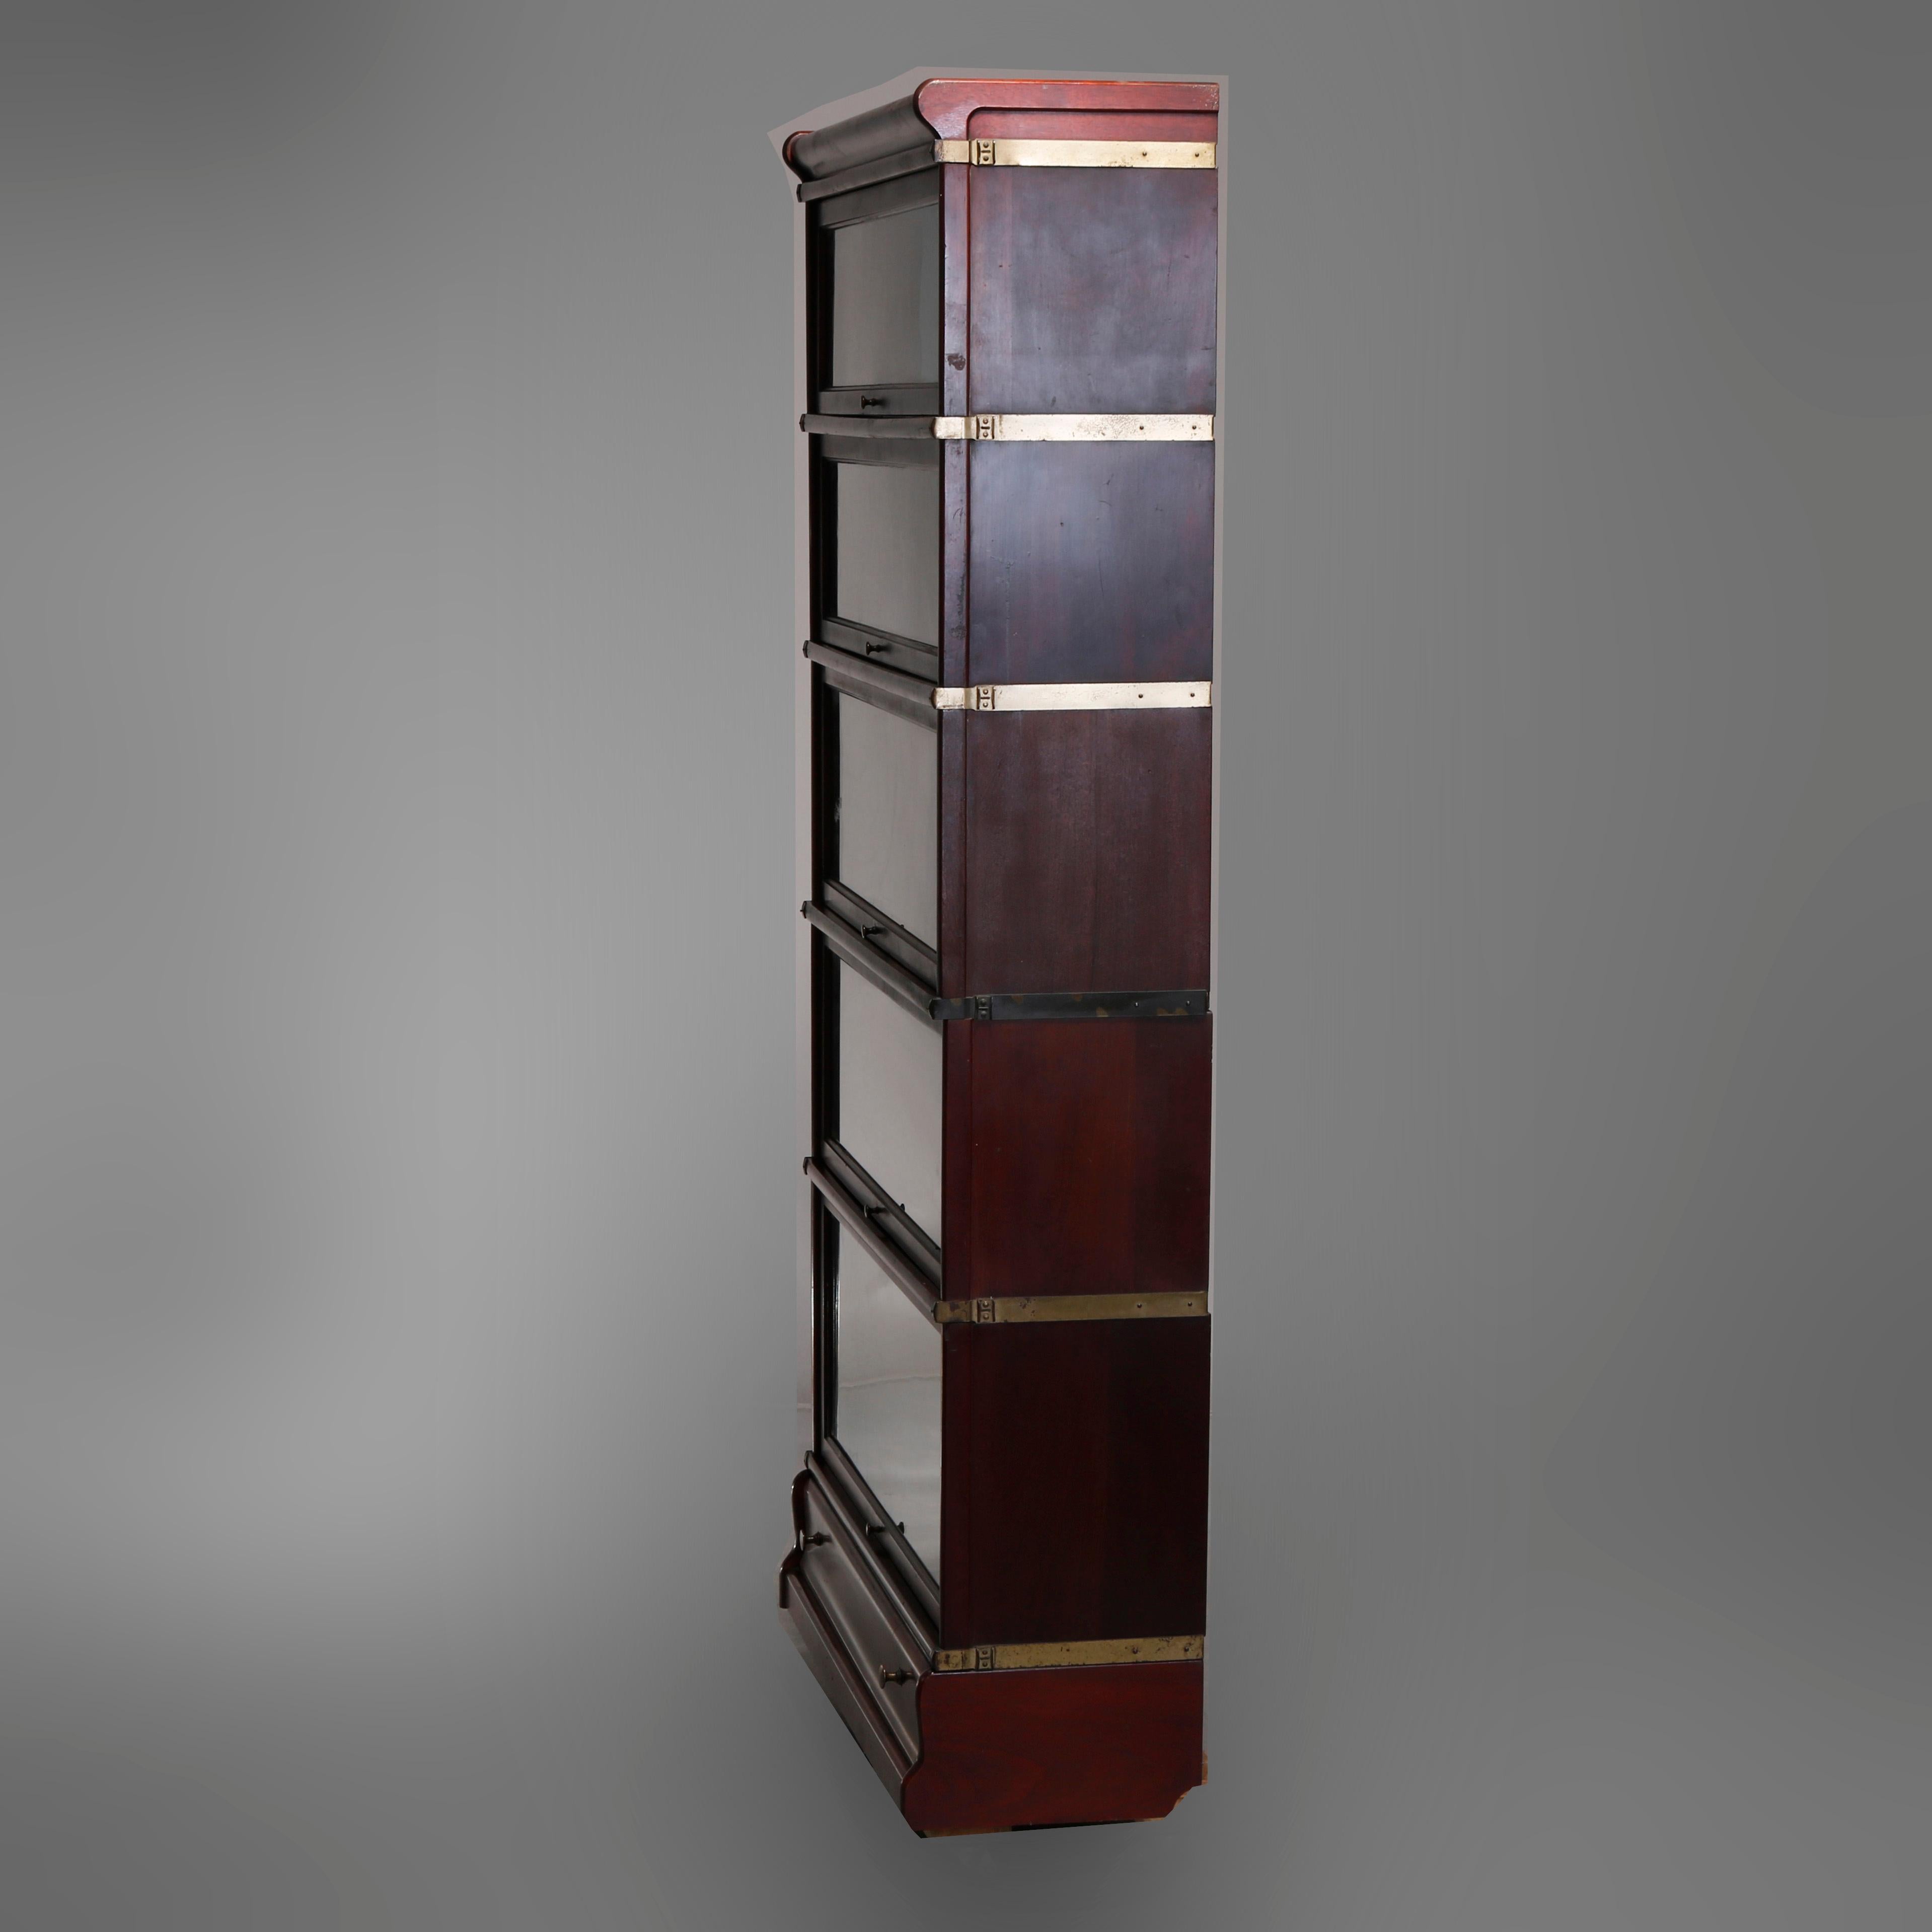 An antique Arts & Crafts Mission Barrister stacking bookcase by Globe Wernicke offers mahogany construction with five sections having pull-out glass doors and lower drawer, original labels as photographed, circa 1910

Measures: 69.75